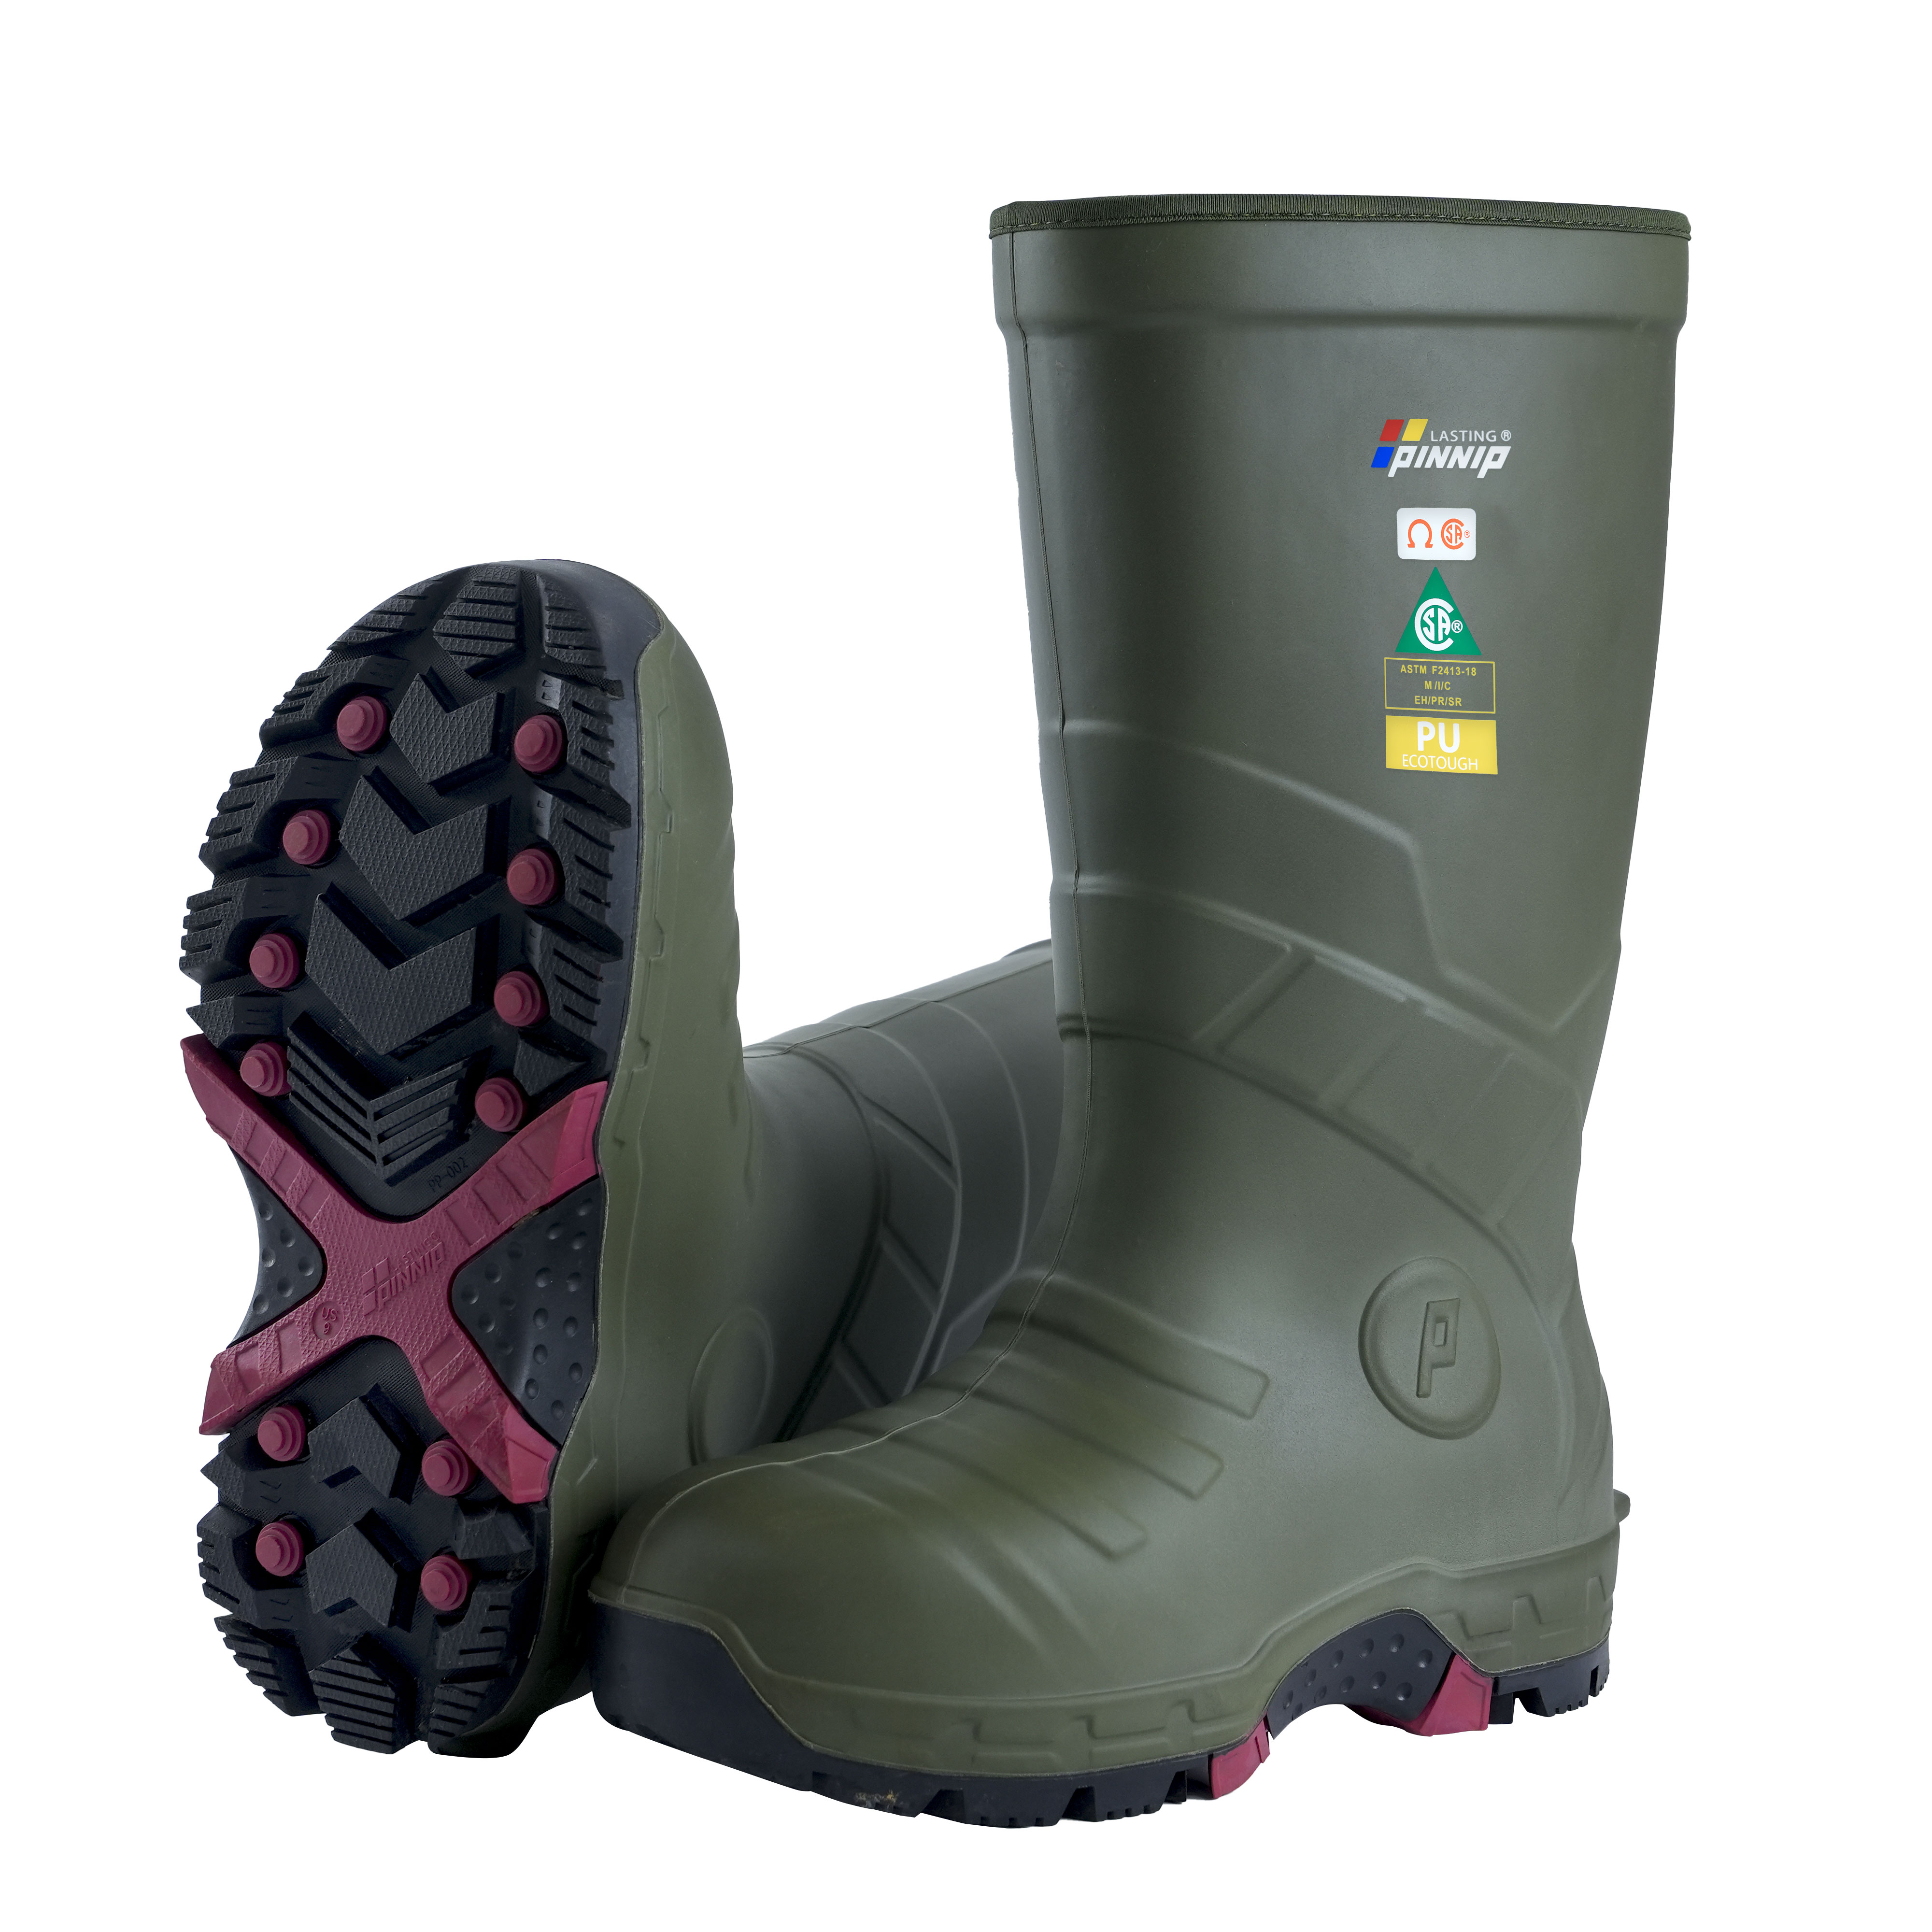 Snow Conquer protective boots-green, safety boots, steel toe boots, Non-slip shoes.